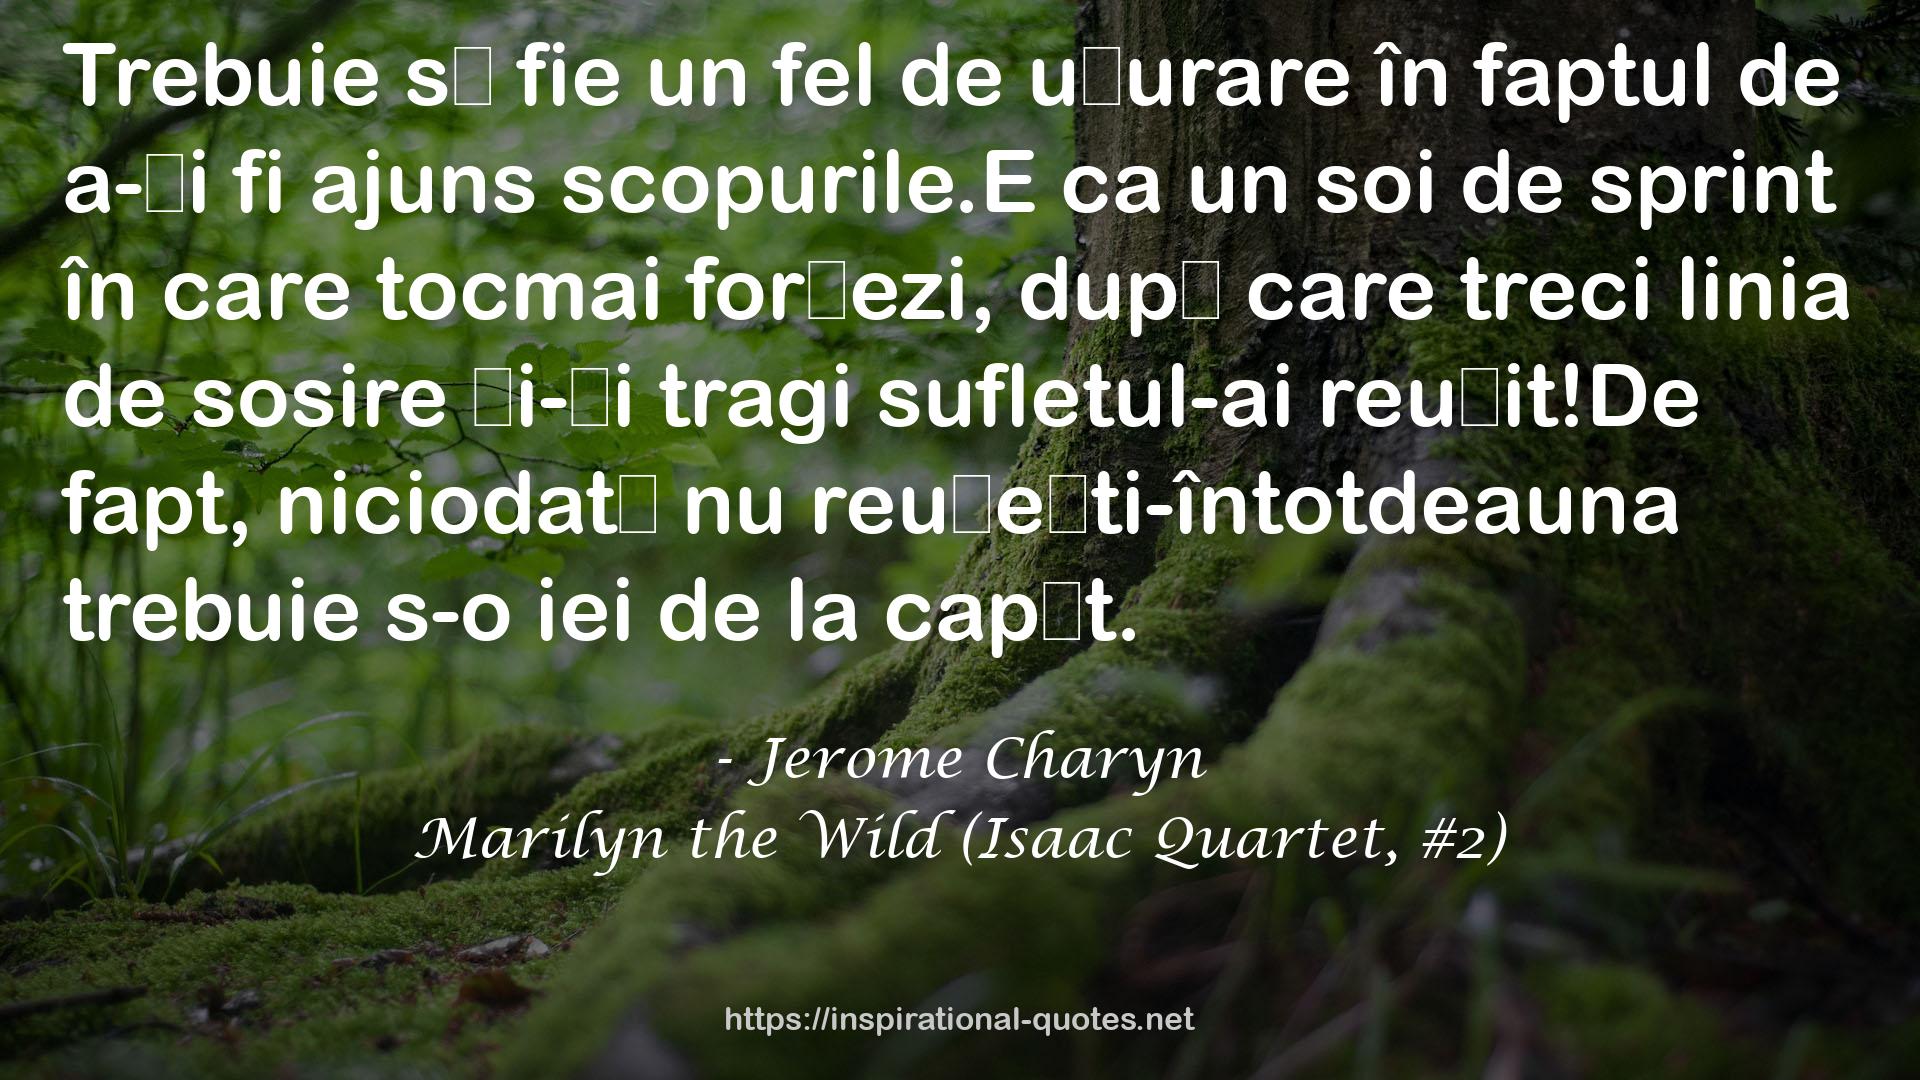 Marilyn the Wild (Isaac Quartet, #2) QUOTES